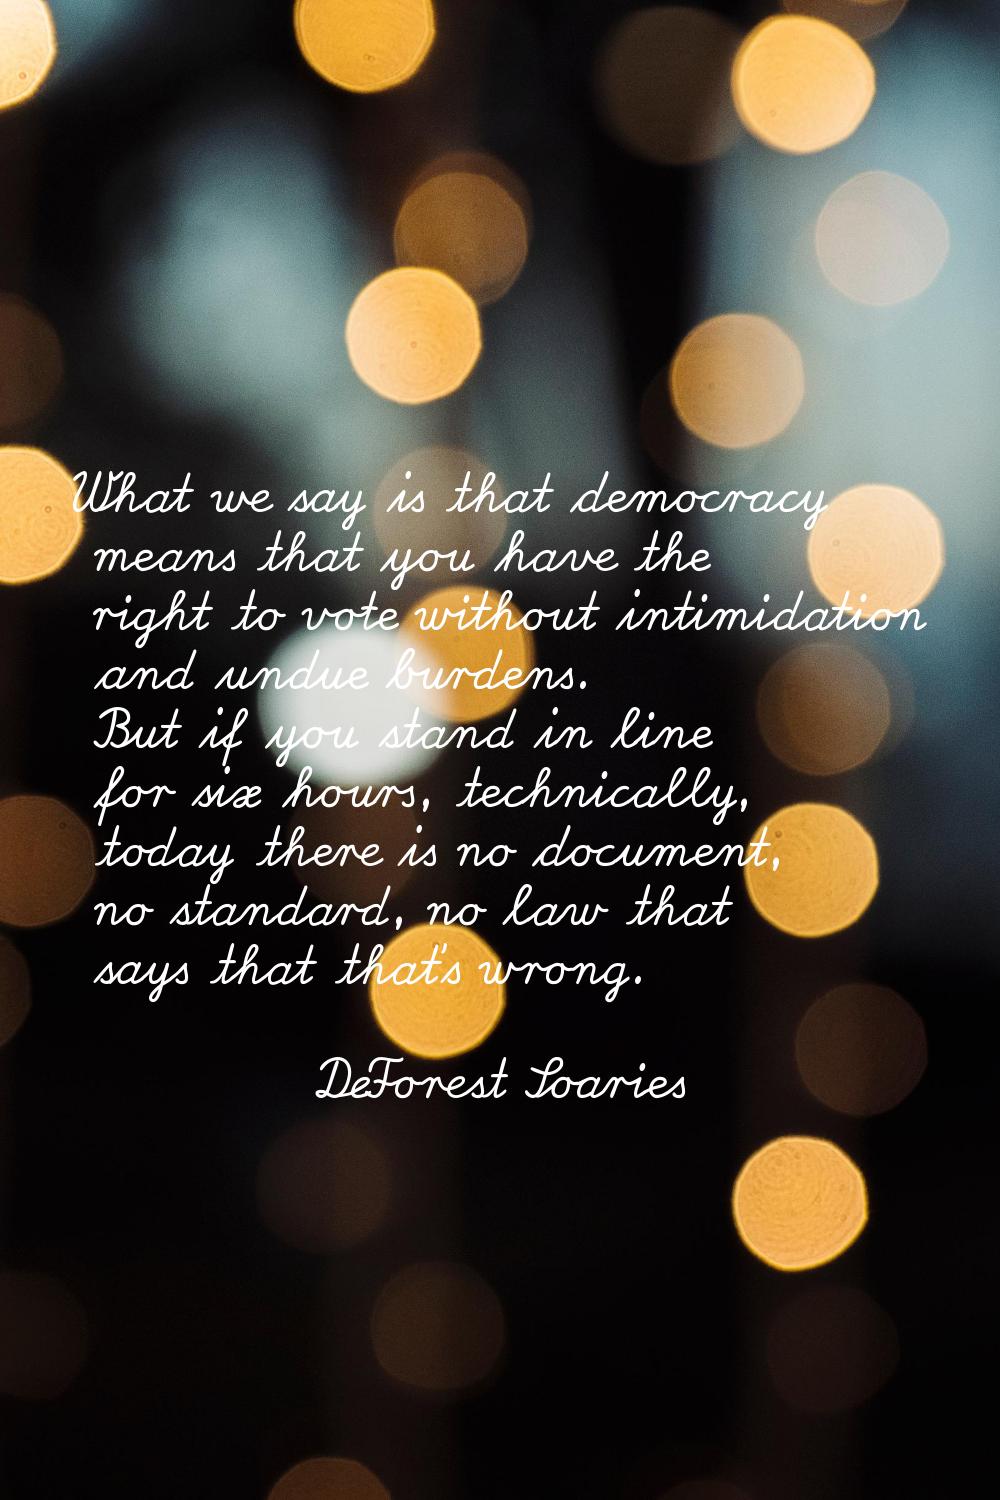 What we say is that democracy means that you have the right to vote without intimidation and undue 